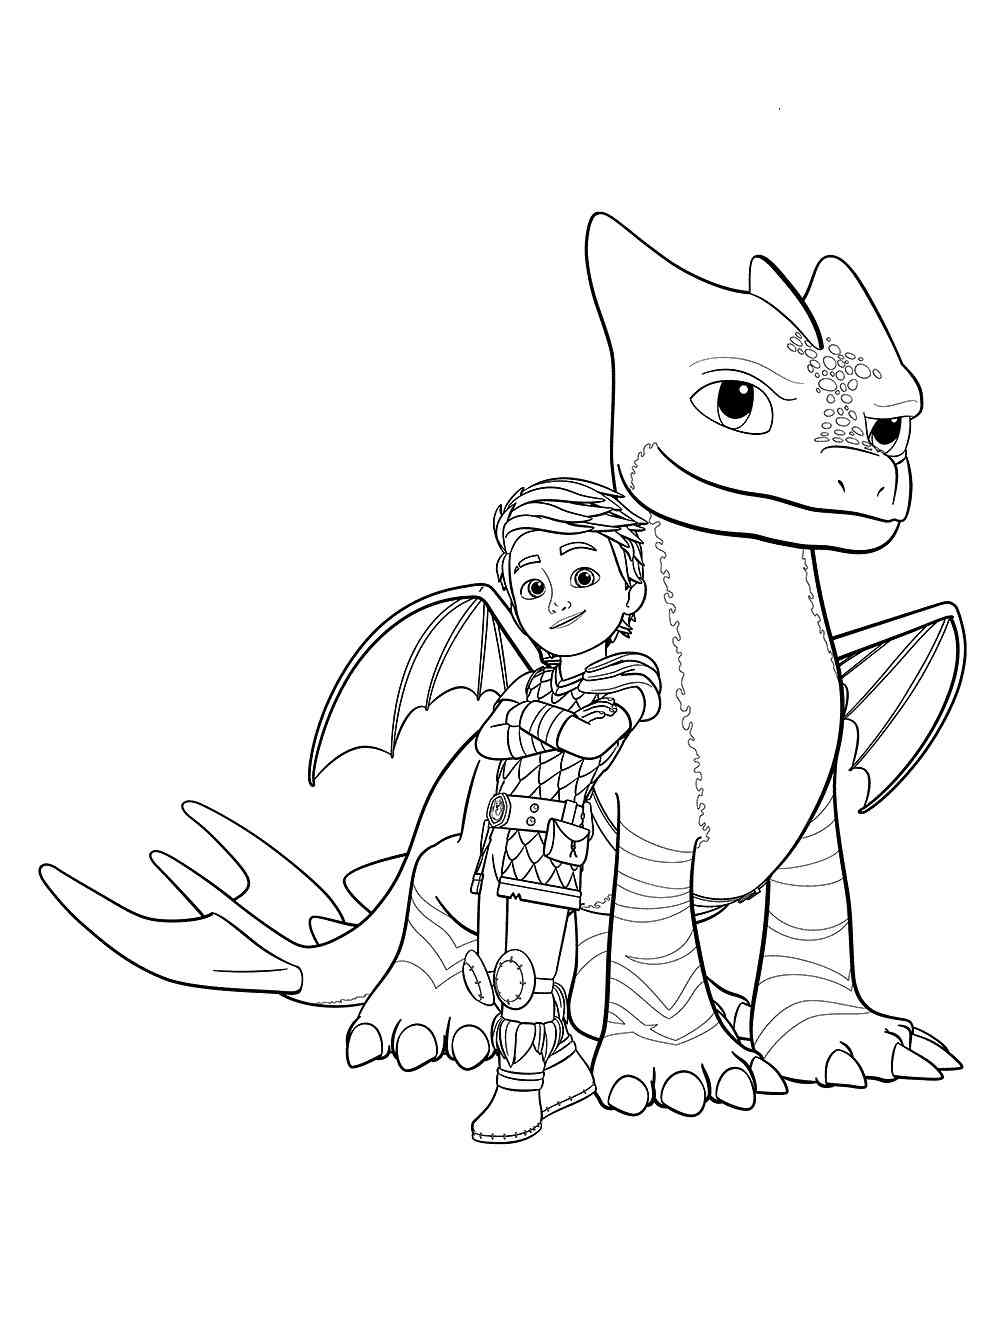 Dragons Rescue Riders 6 coloring page